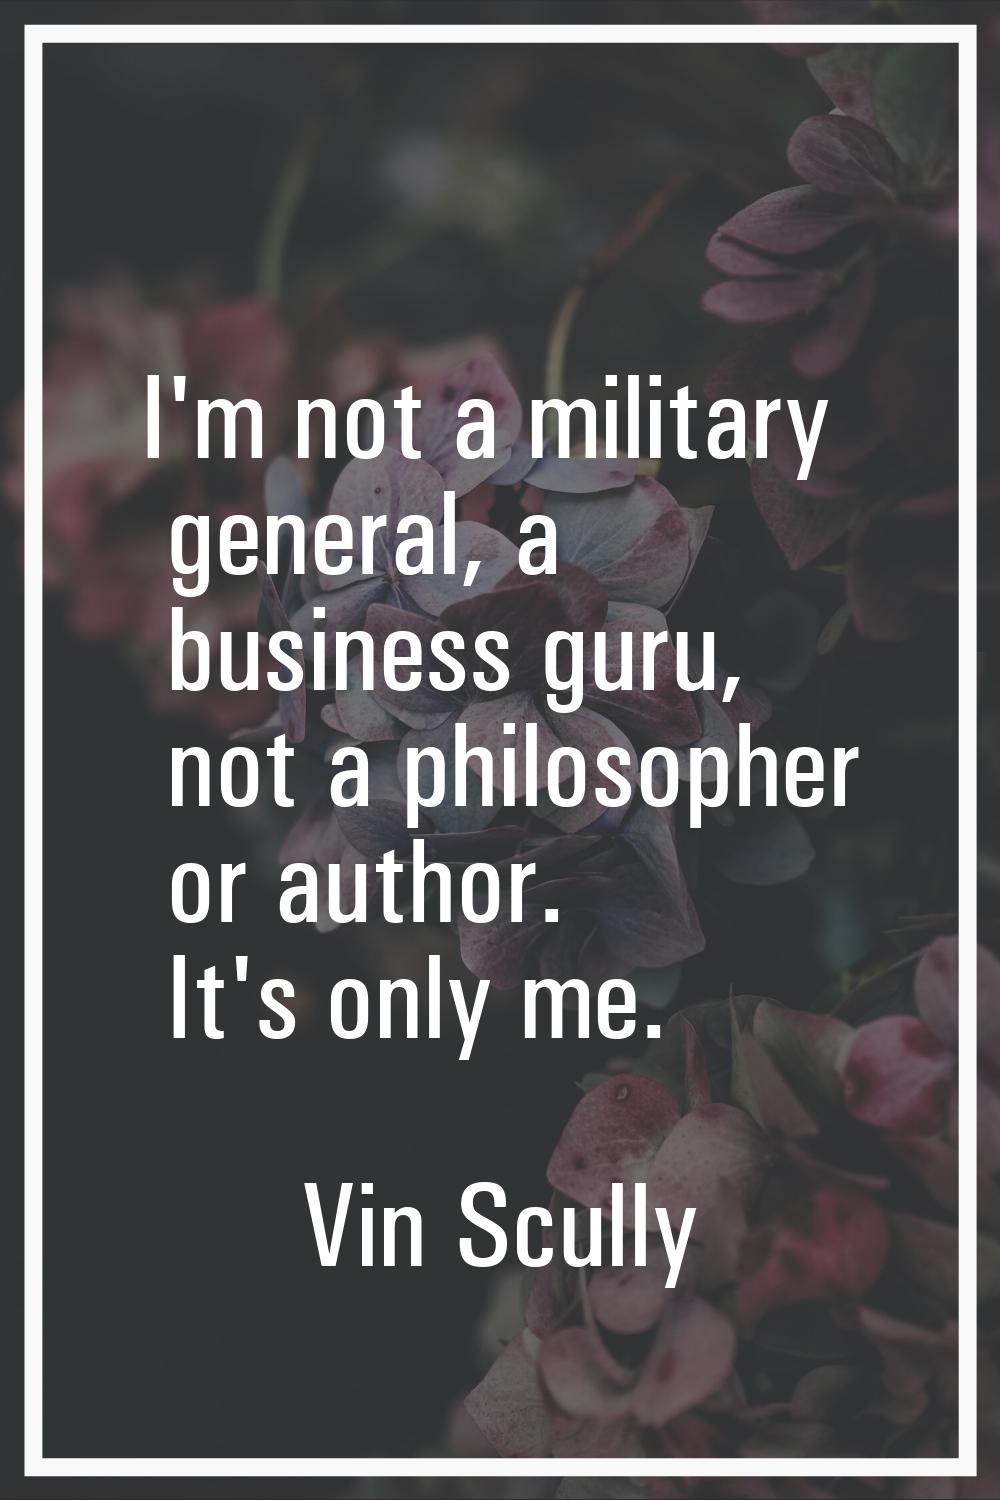 I'm not a military general, a business guru, not a philosopher or author. It's only me.